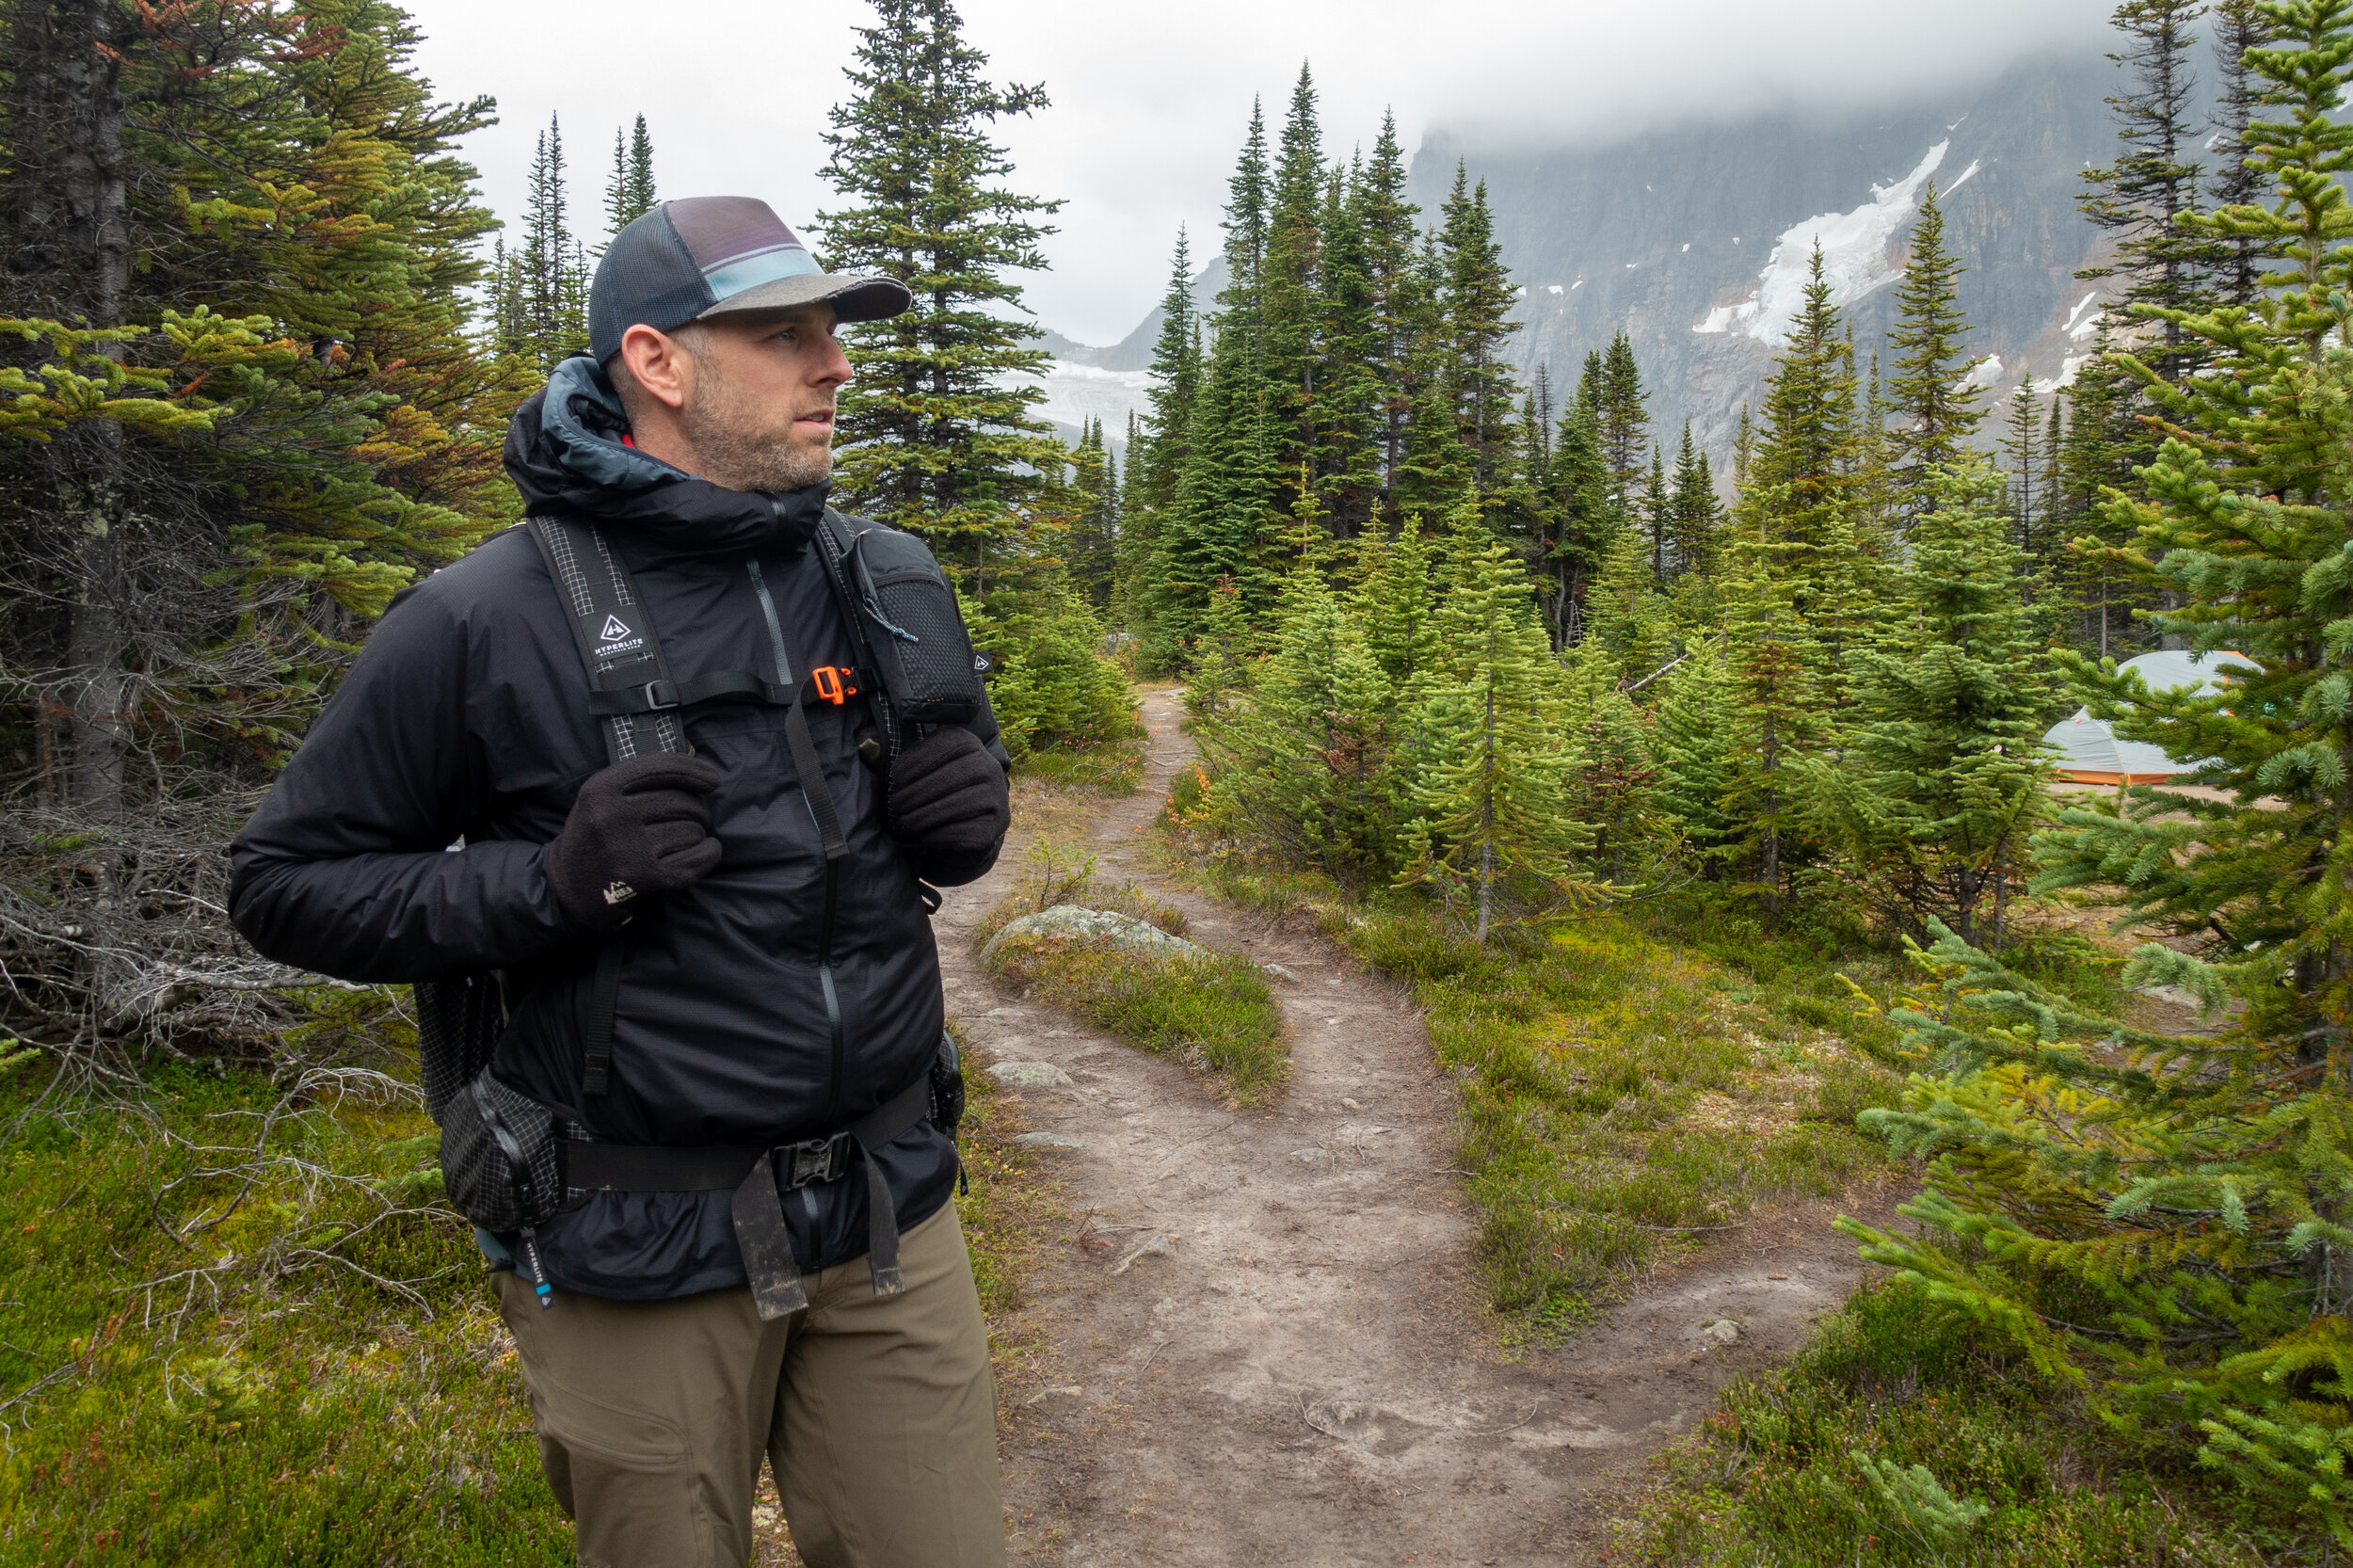 The Arc’teryx Zeta SL is an excellent lightweight option for backpacking in the Pacific Northwest